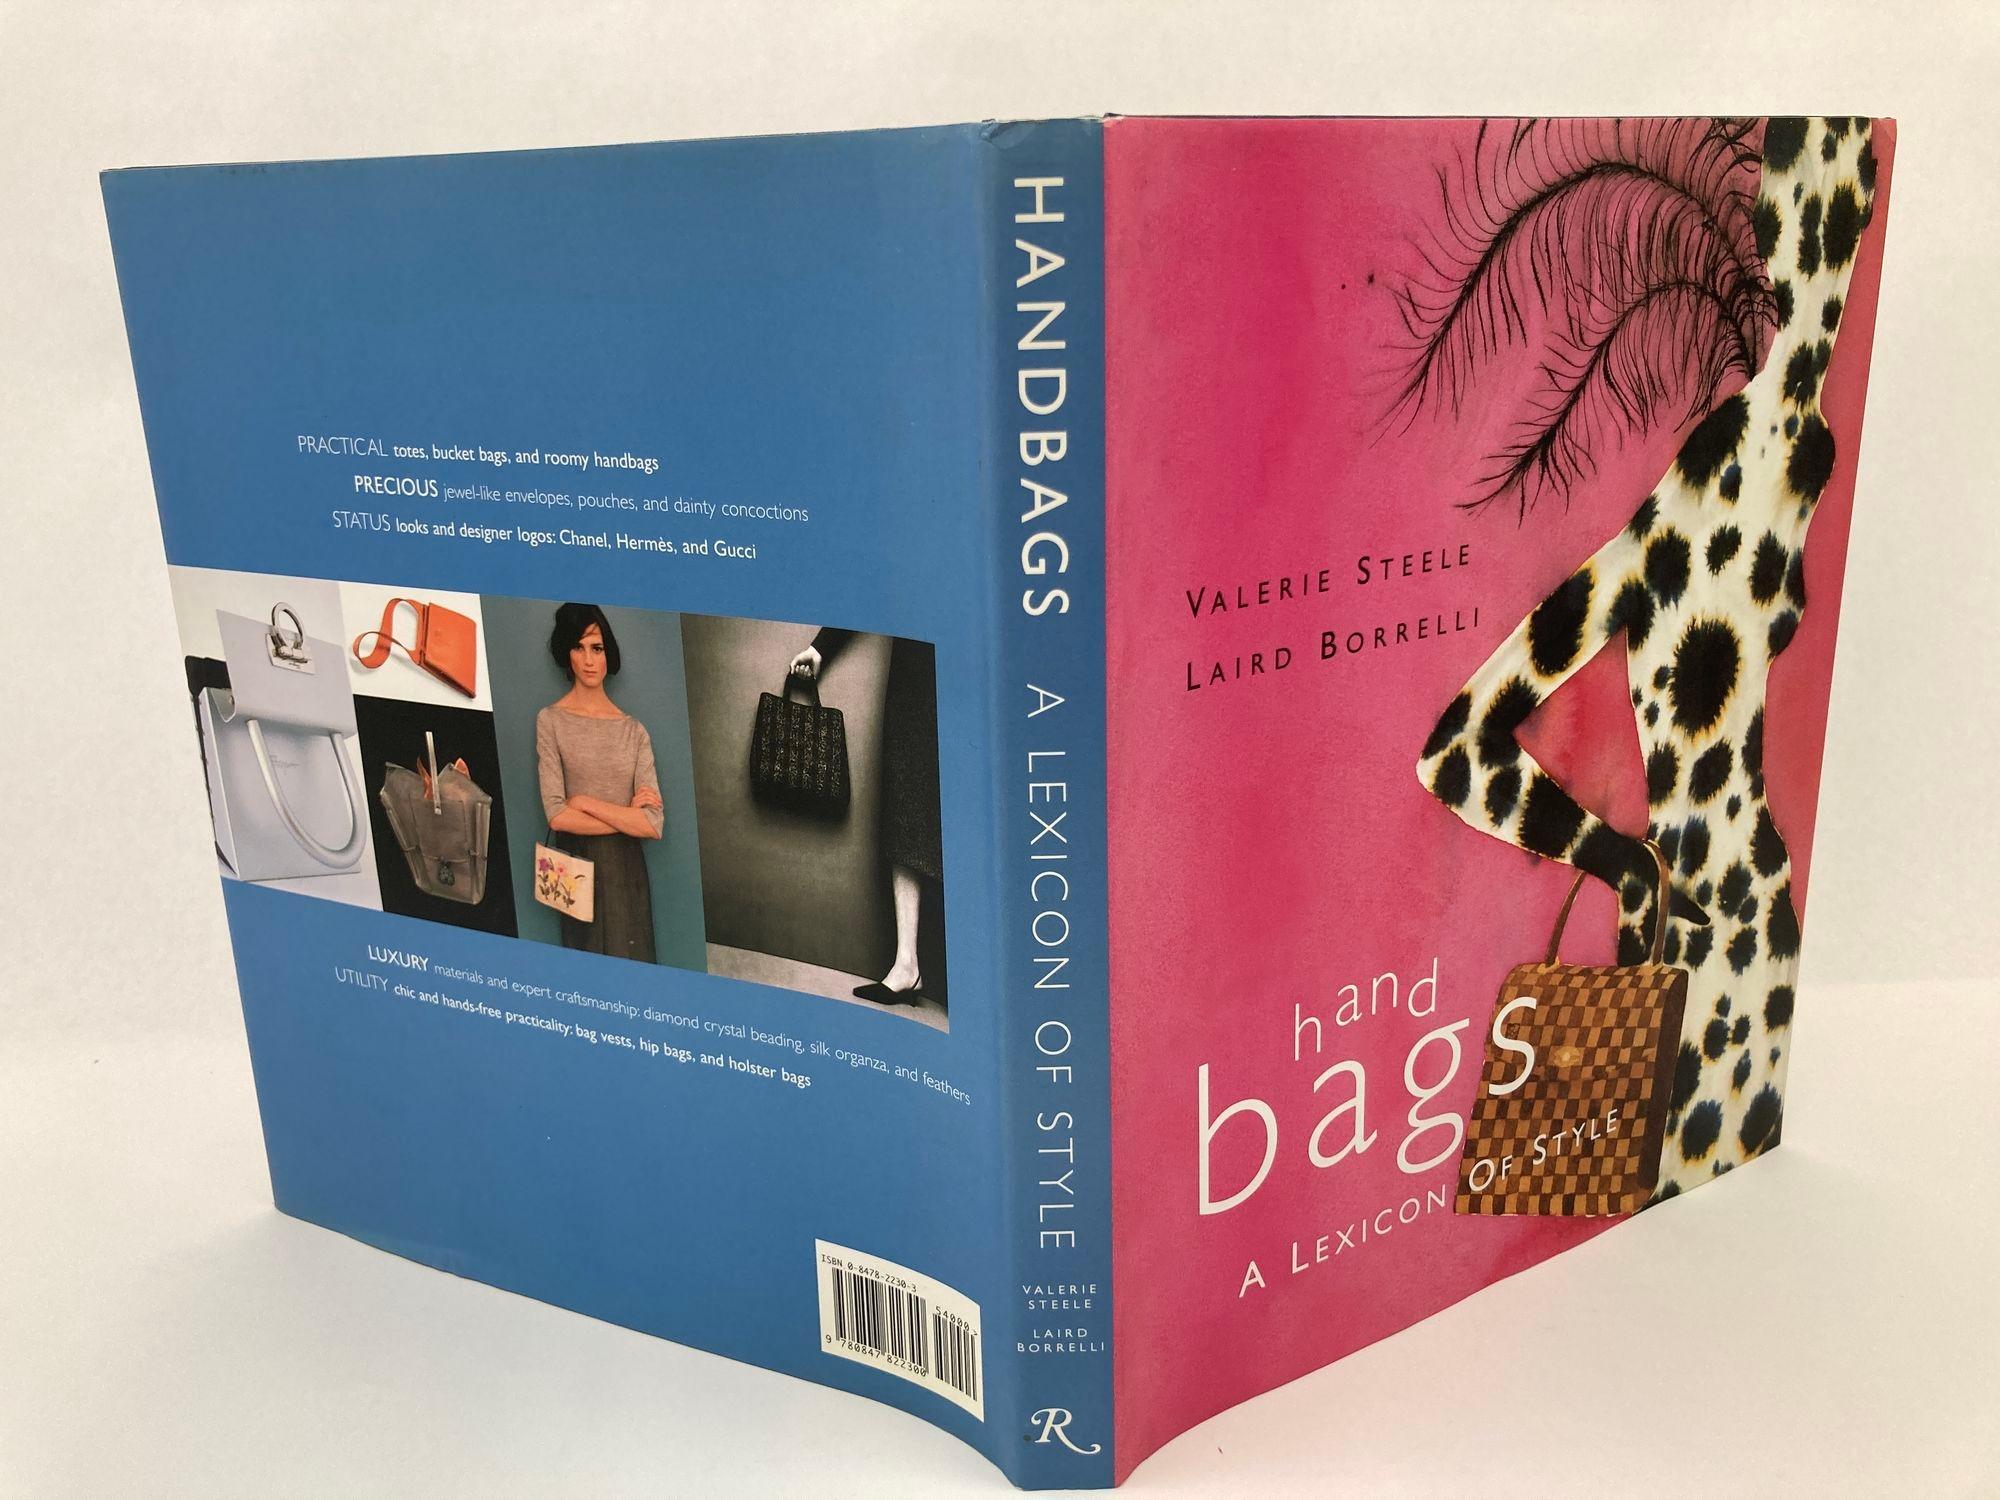 Bags : A Lexicon of Style Valerie Steele, Laird Borrelli Hardcover Book 1st Ed. In Good Condition For Sale In North Hollywood, CA